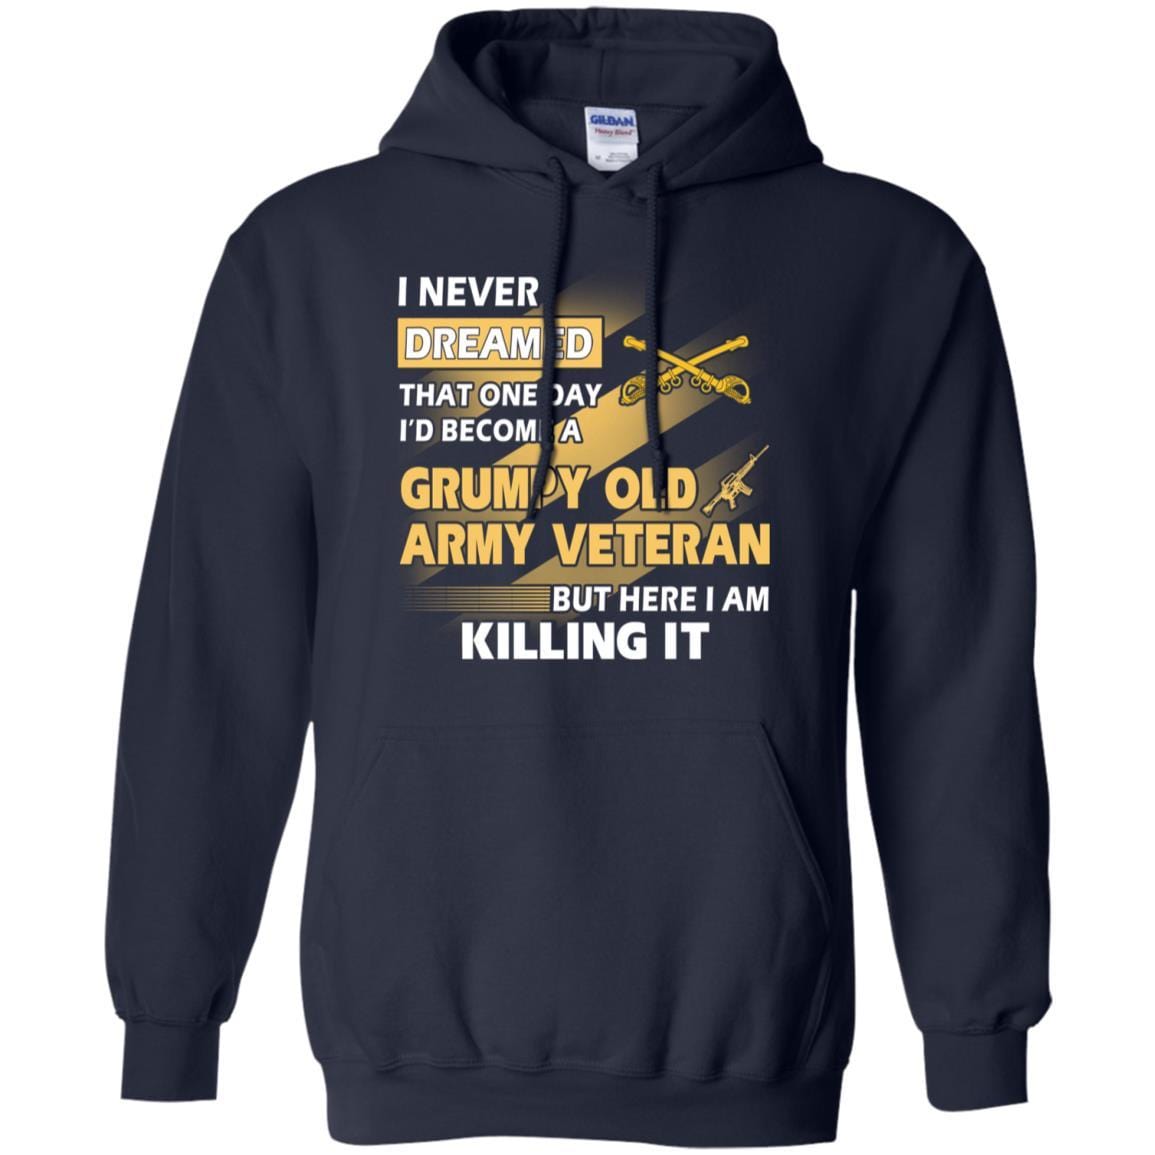 US Army T-Shirt "Cavalry Grumpy Old Veteran" On Front-TShirt-Army-Veterans Nation